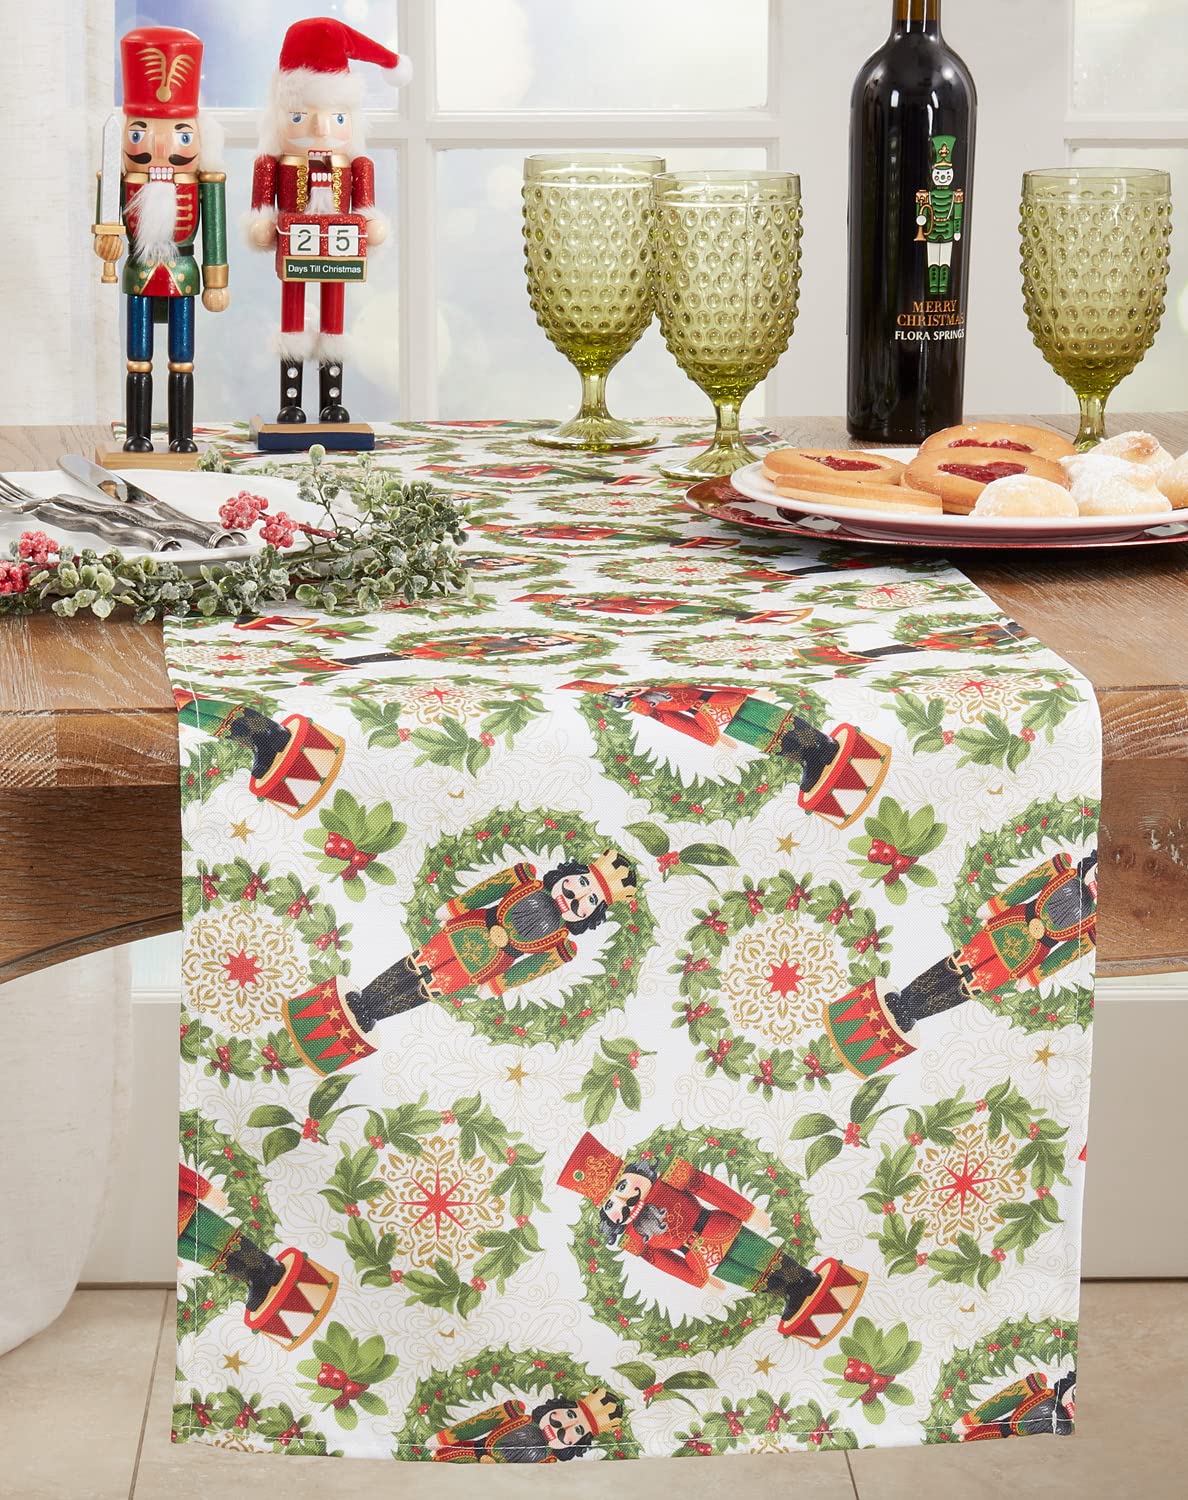 Fennco Styles Nutcracker Holiday Table Runner 16" W X 70" L - Red & Green Festive Table Cover for Christmas Décor, Dining Room, Banquet, Family Gathering and Special Events